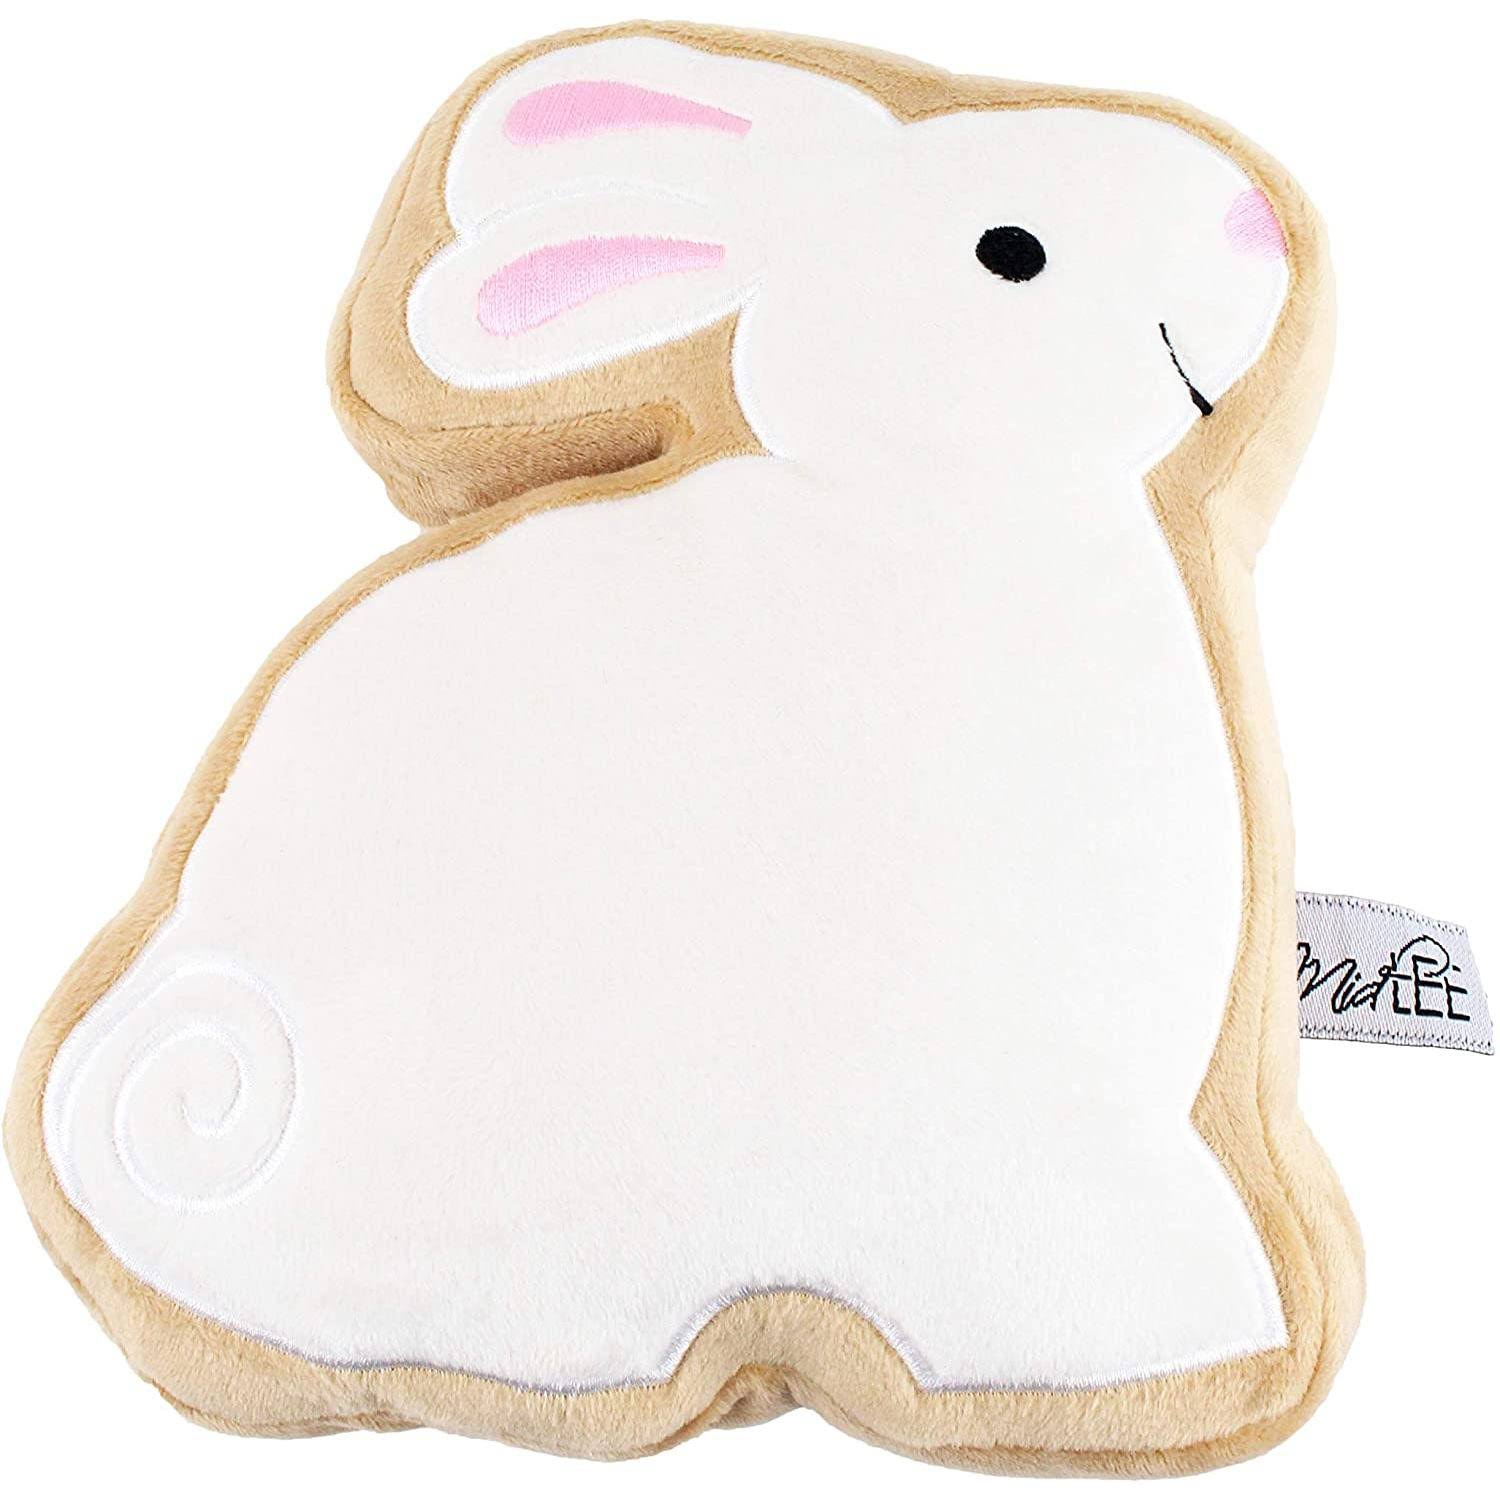 Midlee Sugar Cookie Easter Bunny Dog Toy (Small)